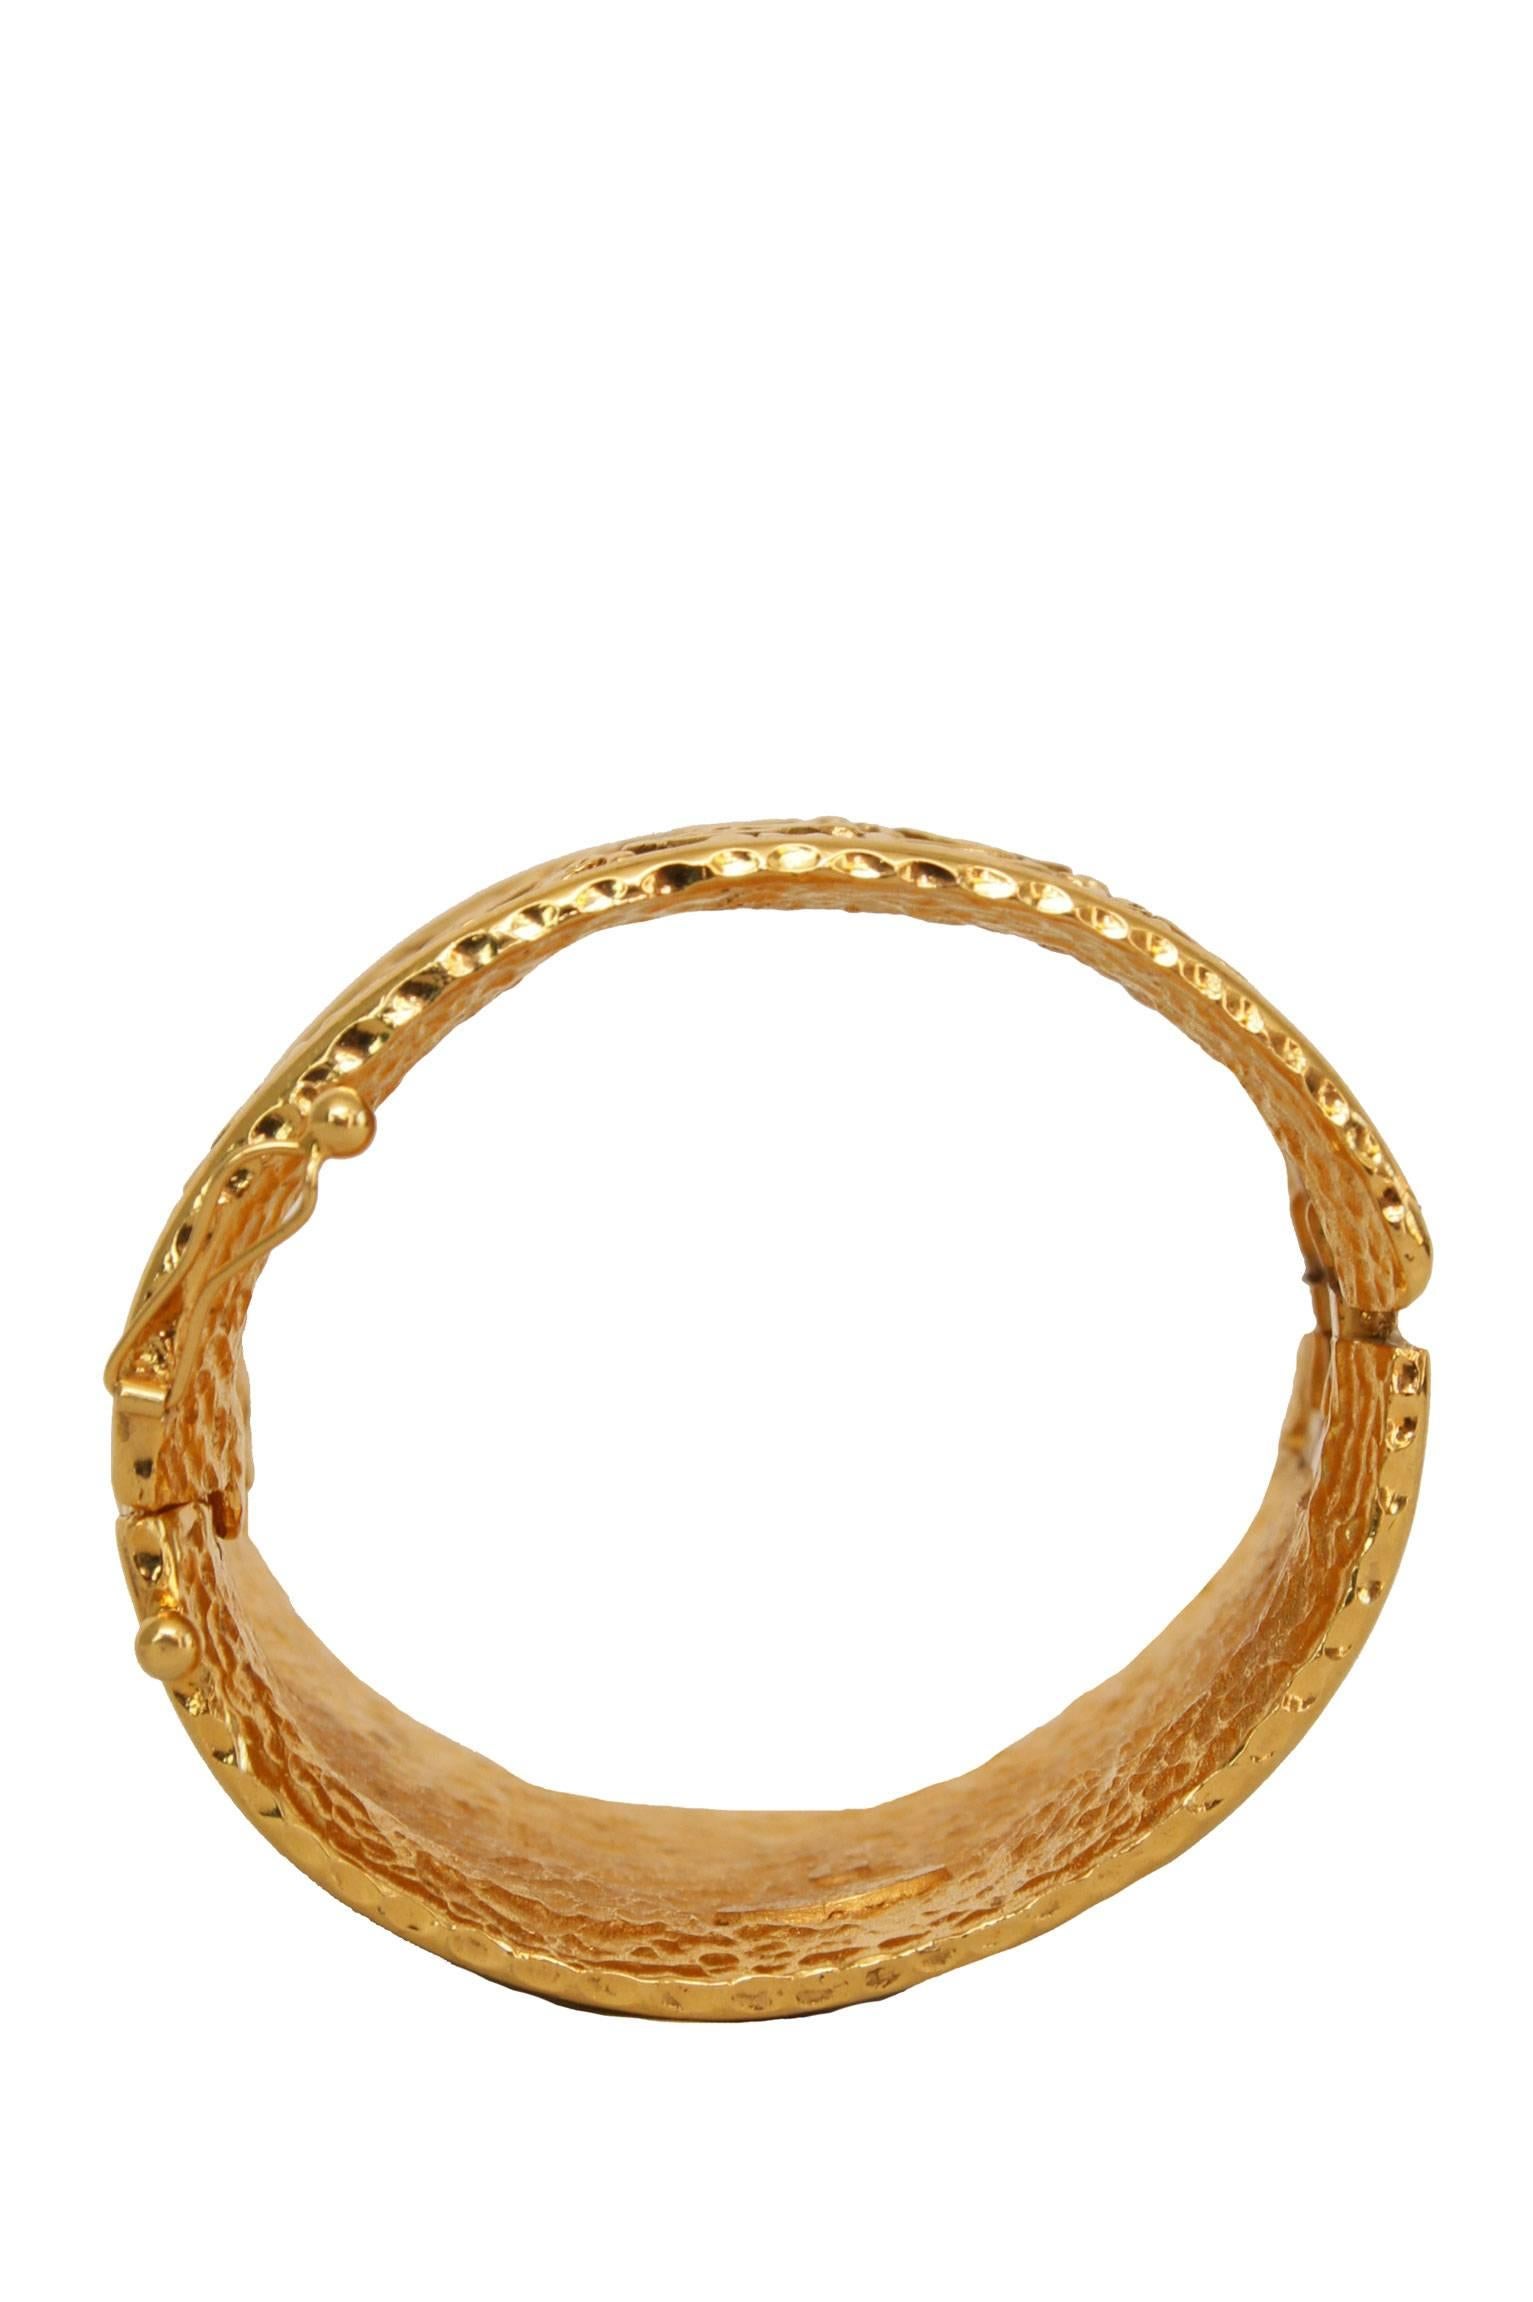 Women's or Men's An Engraved 1980s Gold-toned Chanel Cuff Bracelet